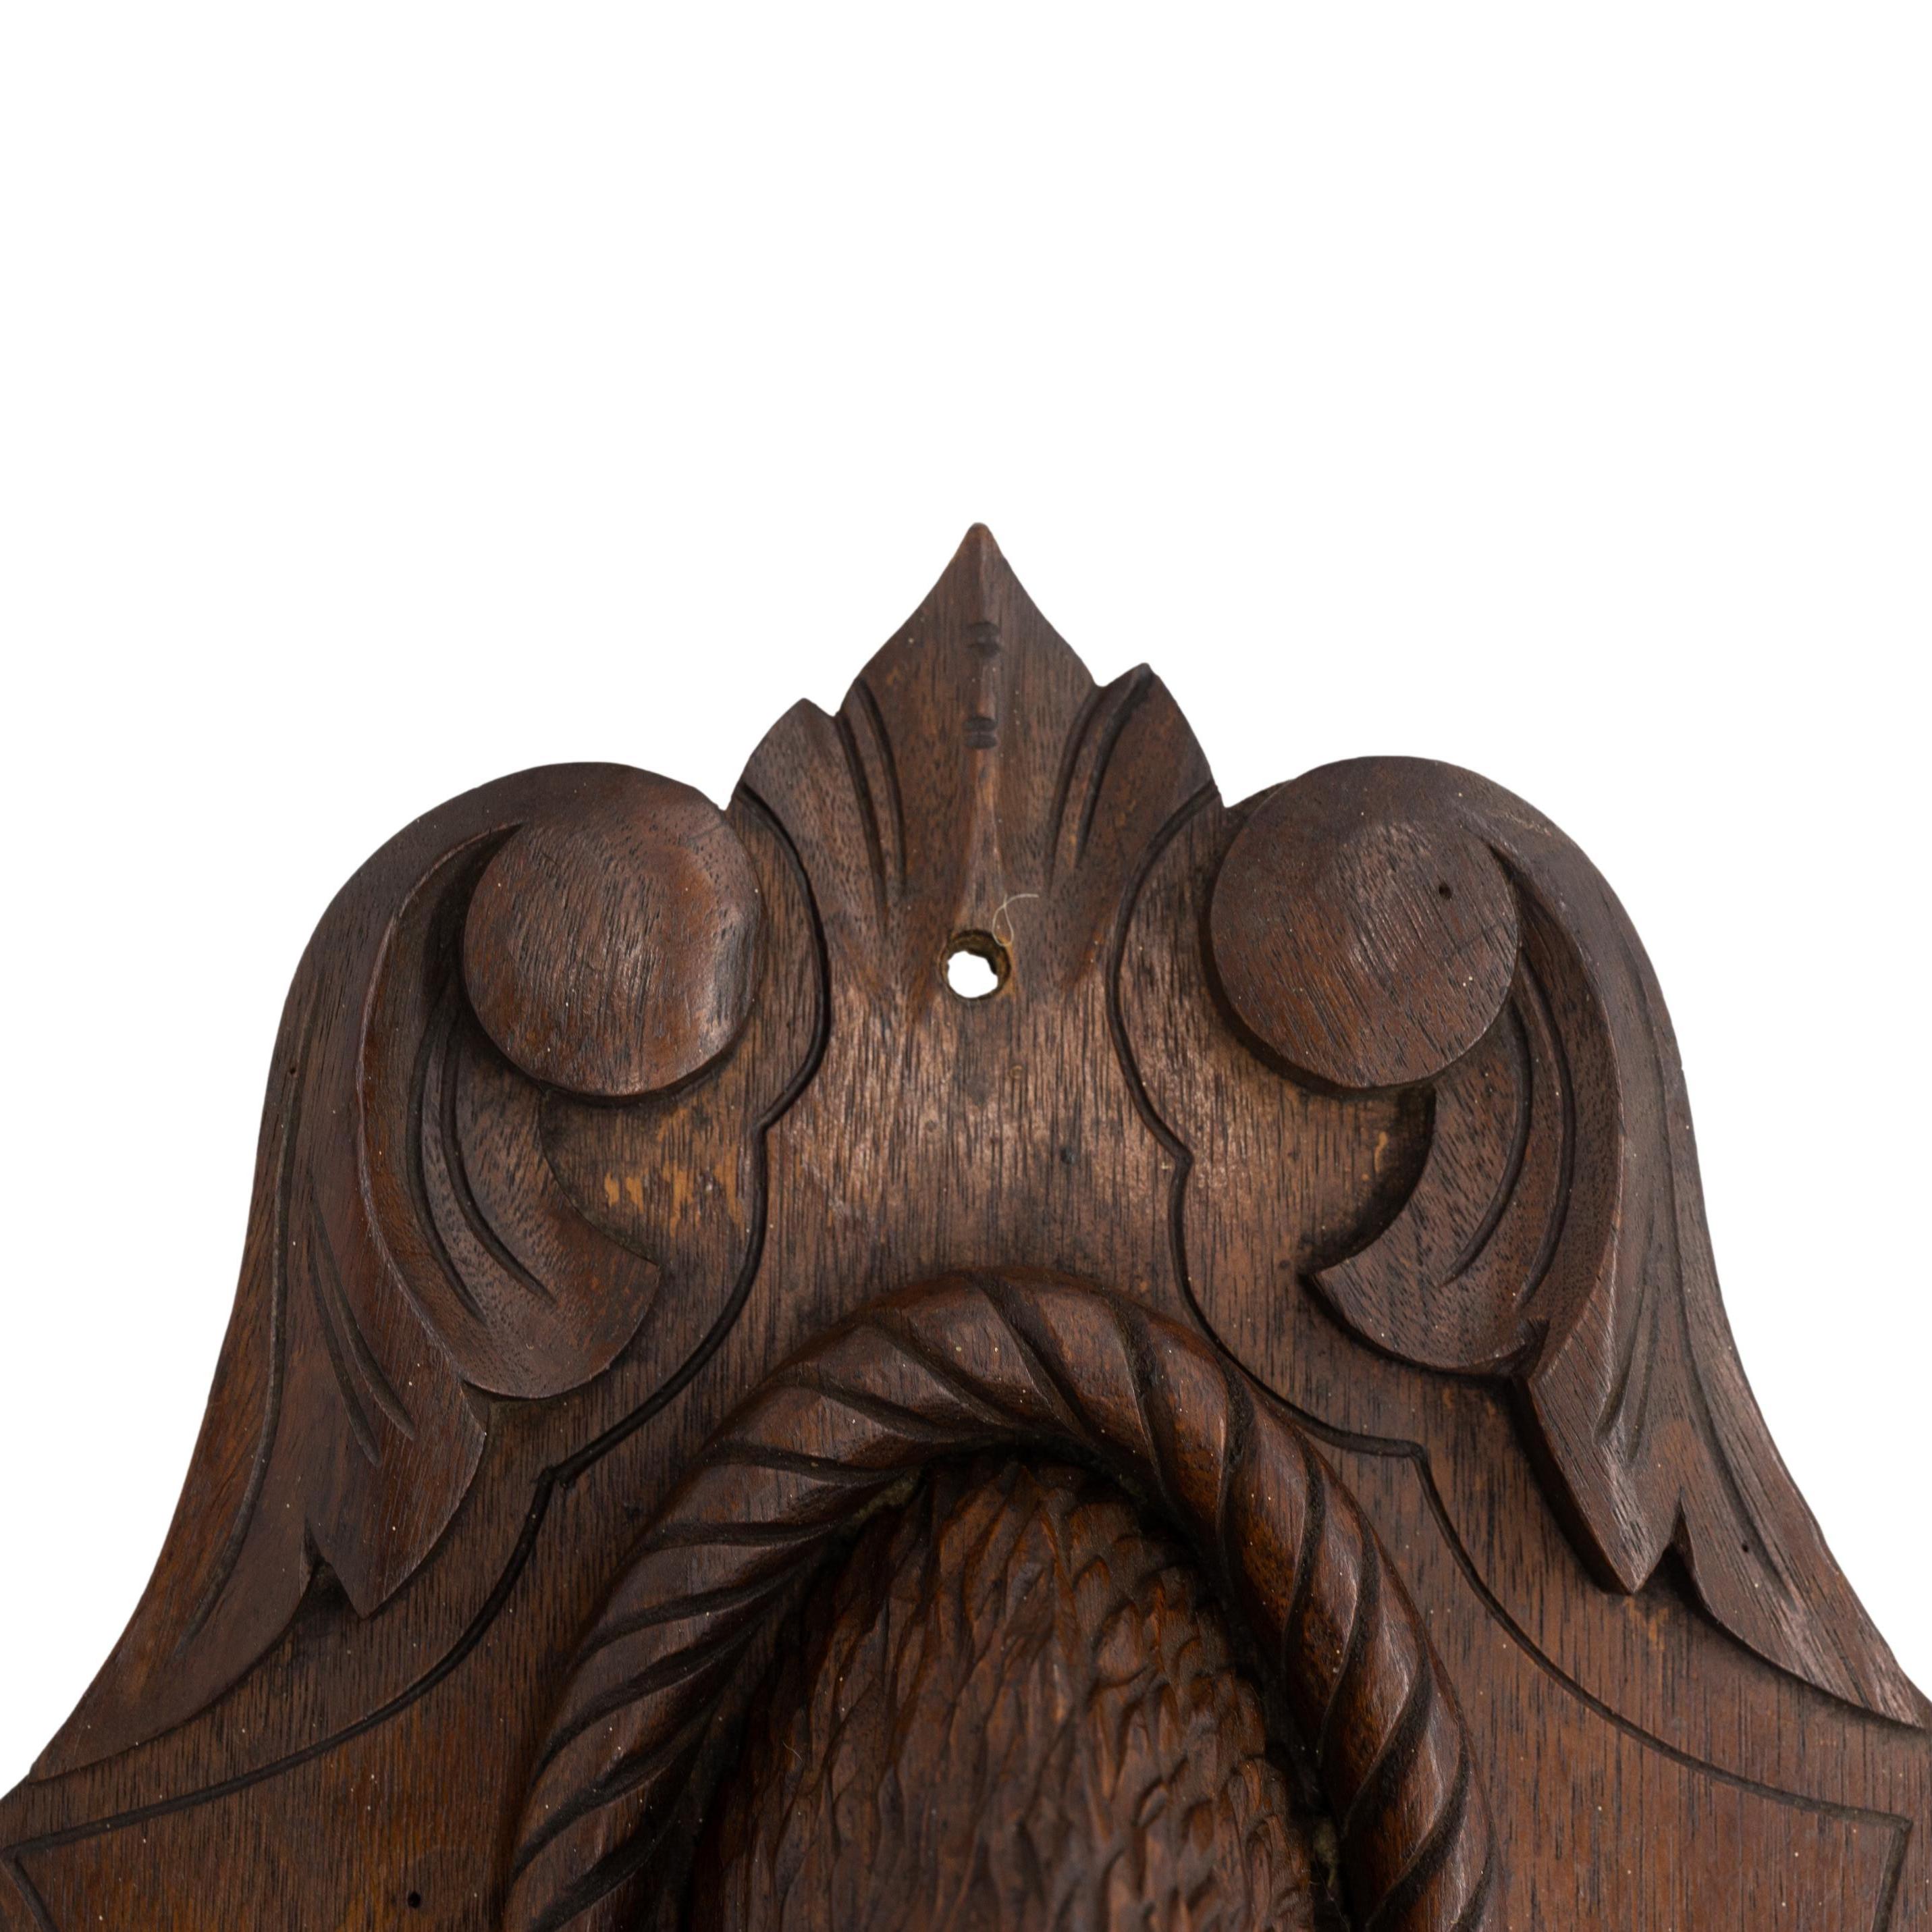 Black Forest Carved Linden Wood Deer Head, mounted on a carved and molded oak plaque, with a shaped and molded shelf, Brienz, Switzerland, ca. 1880.    
Jay Arenski quotes Swiss Poet Heinrich Federer, who said in his memoirs, 